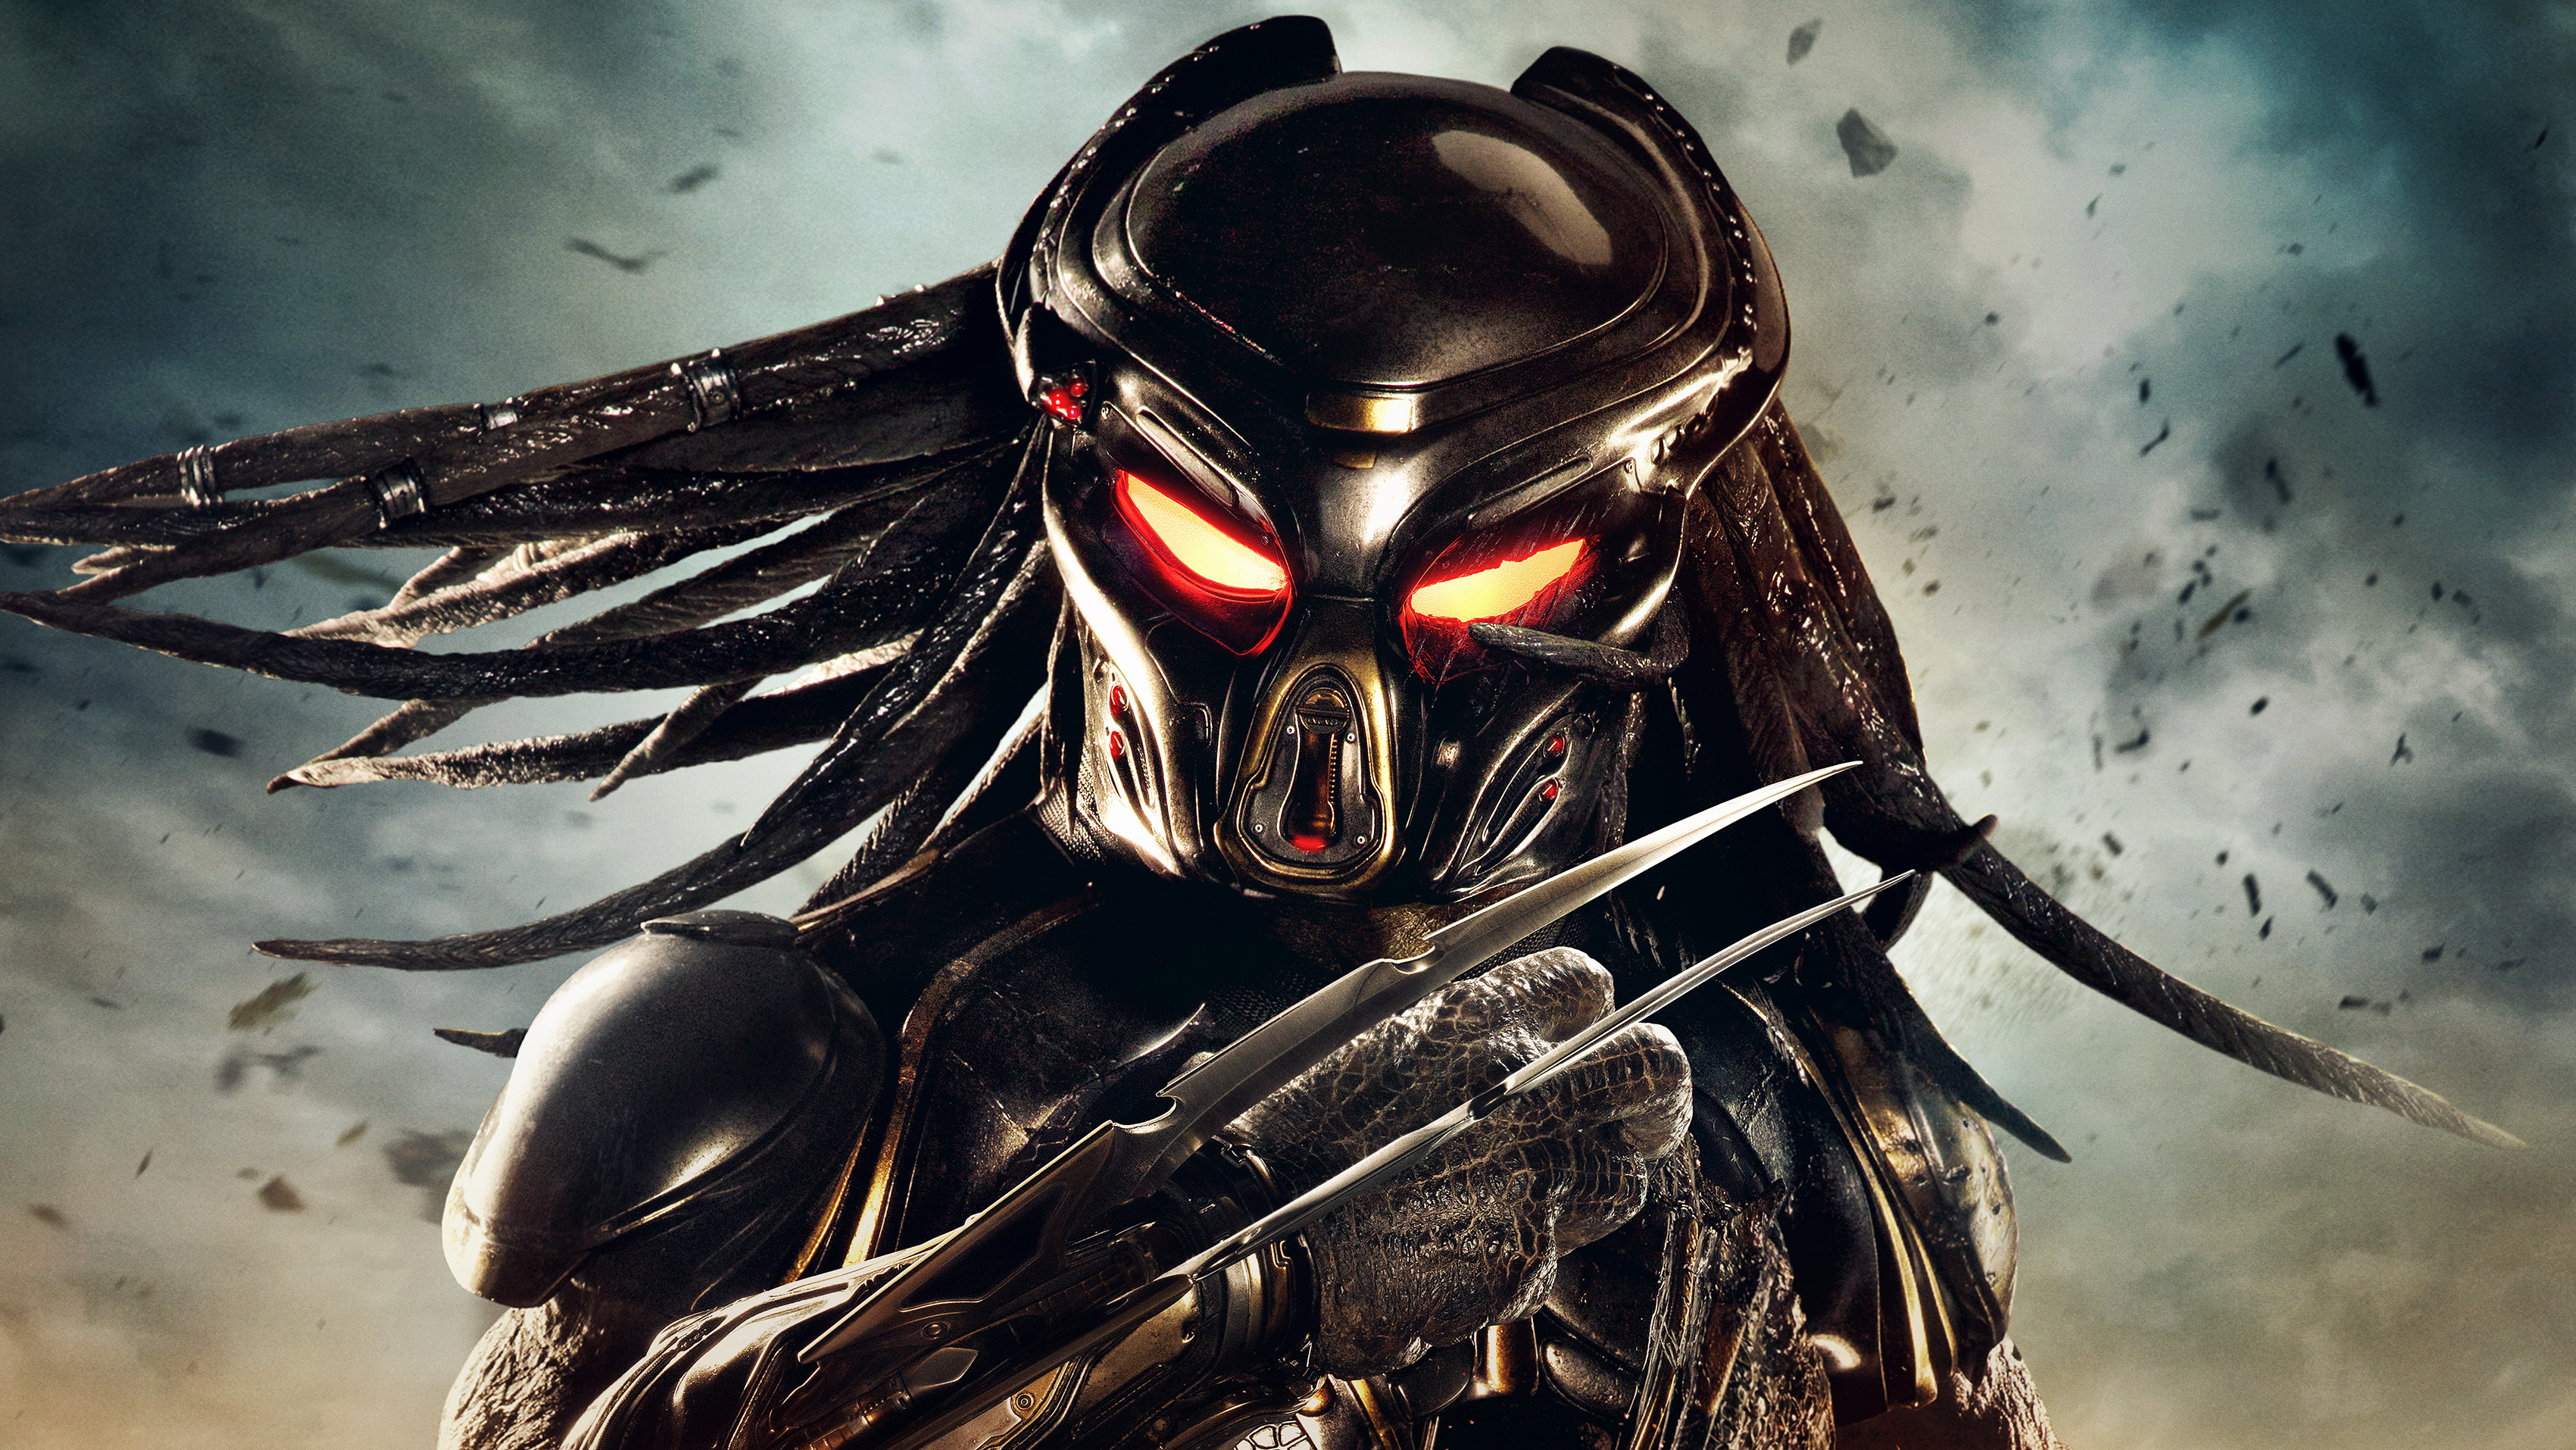 Page 2 of Predator 4K wallpapers for your desktop or mobile screen